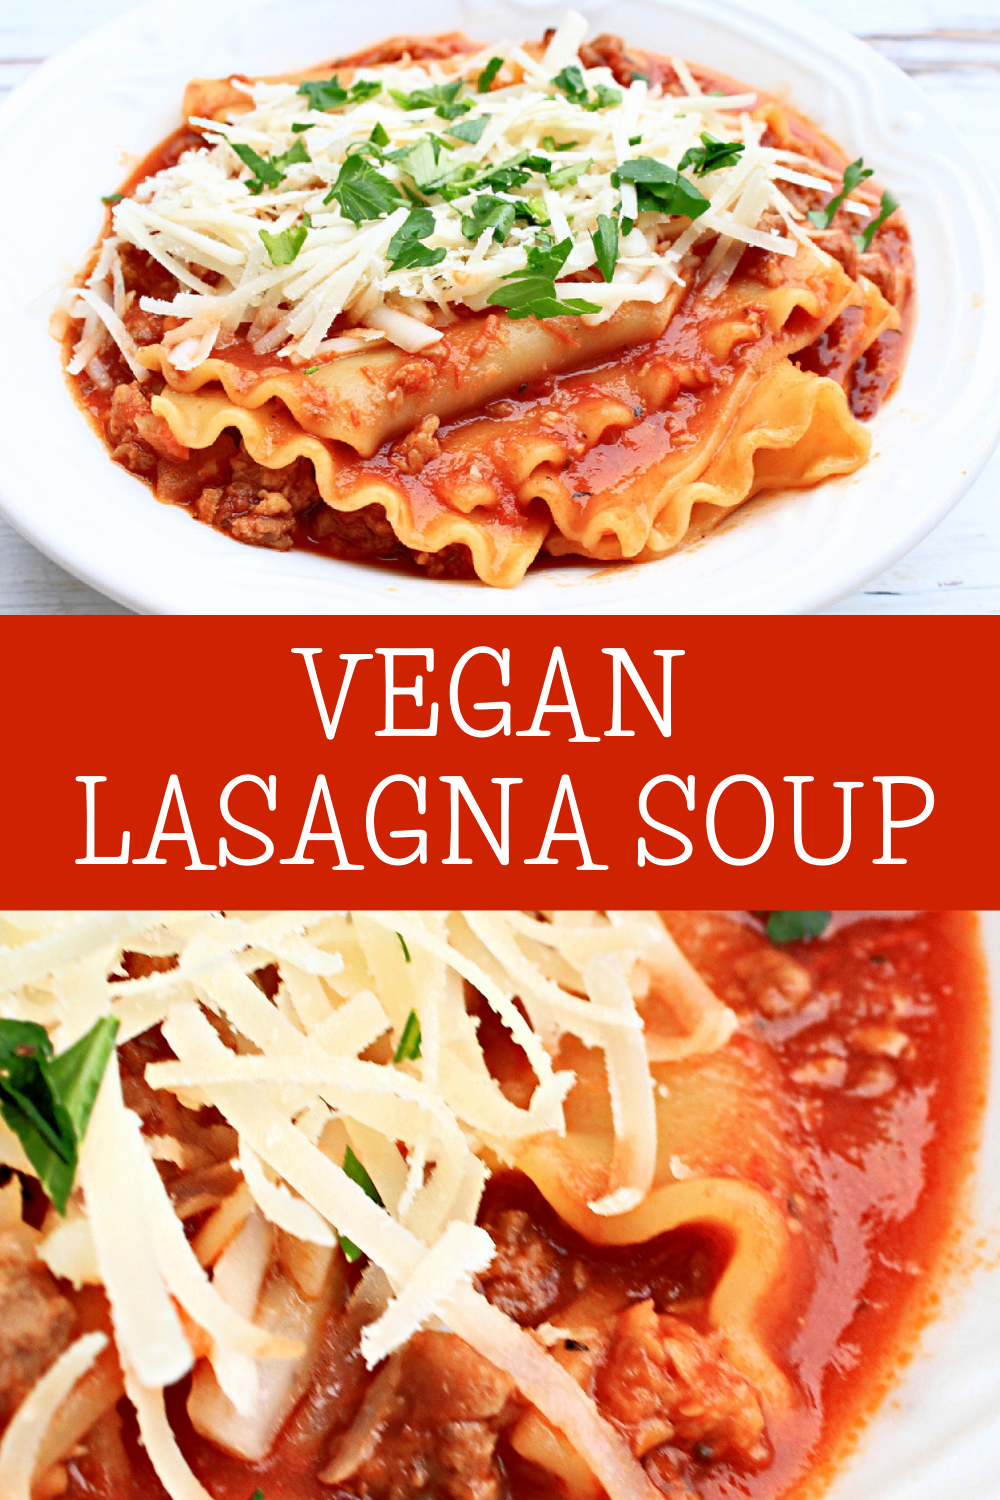 Lasagna Soup ~ Enjoy the flavors of a good old-fashioned Italian-style lasagna casserole in an easy-to-make vegan soup! Ready to serve in 30 minutes! via @thiswifecooks